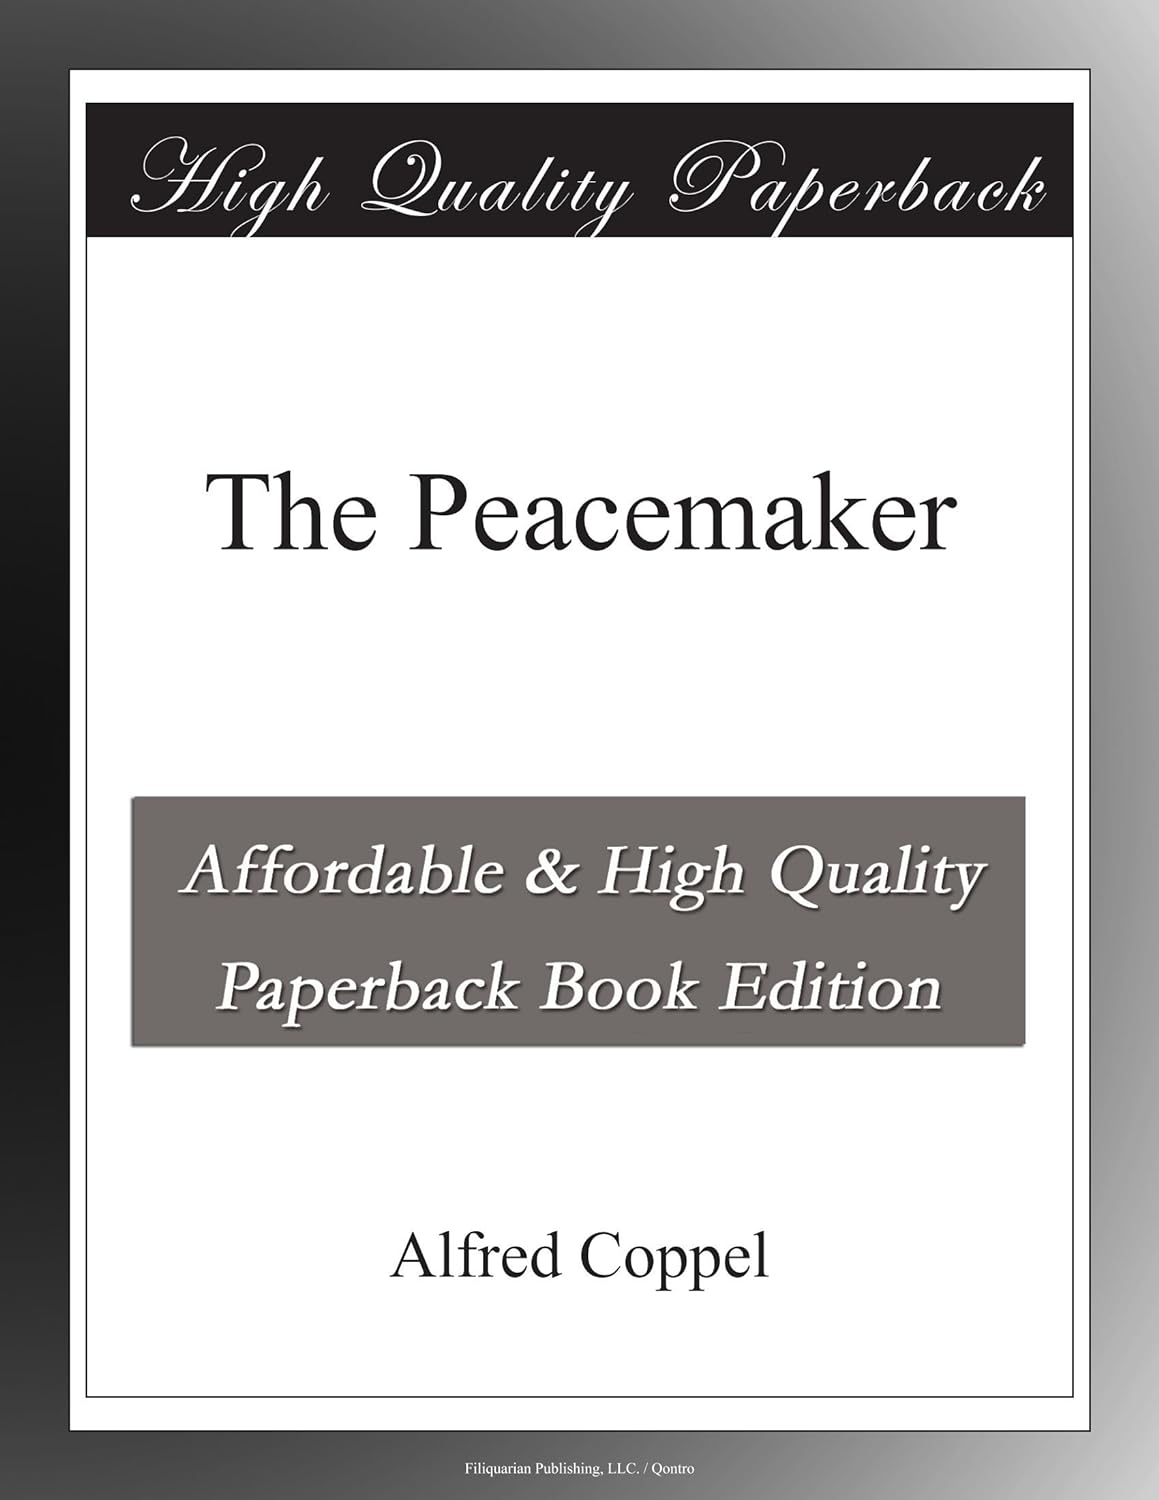 The Peacemaker - Alfred Coppel